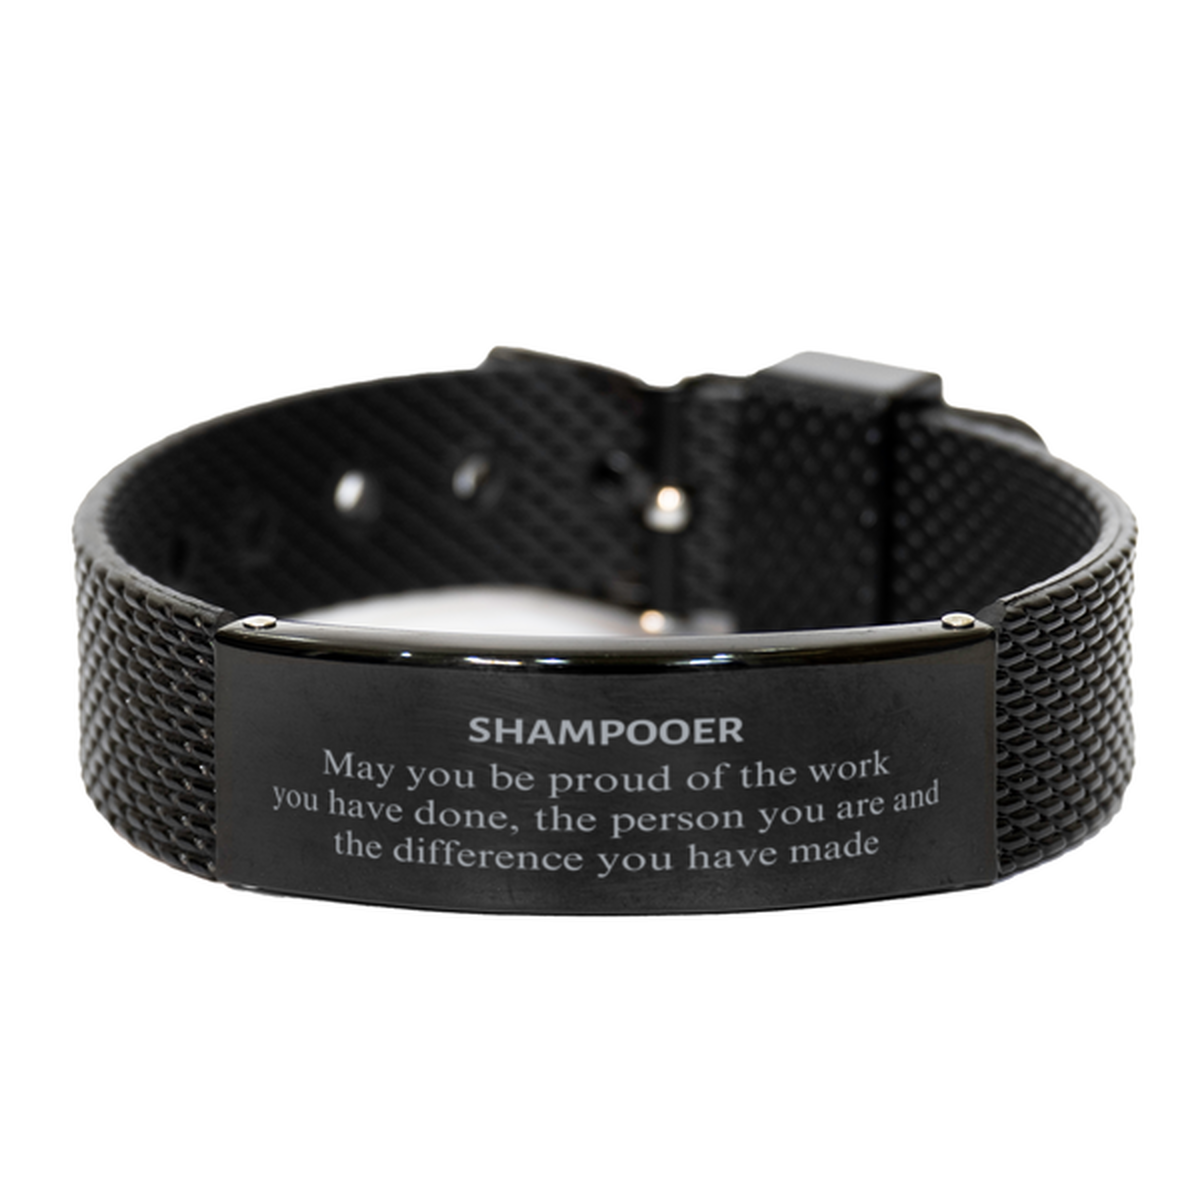 Shampooer May you be proud of the work you have done, Retirement Shampooer Black Shark Mesh Bracelet for Colleague Appreciation Gifts Amazing for Shampooer